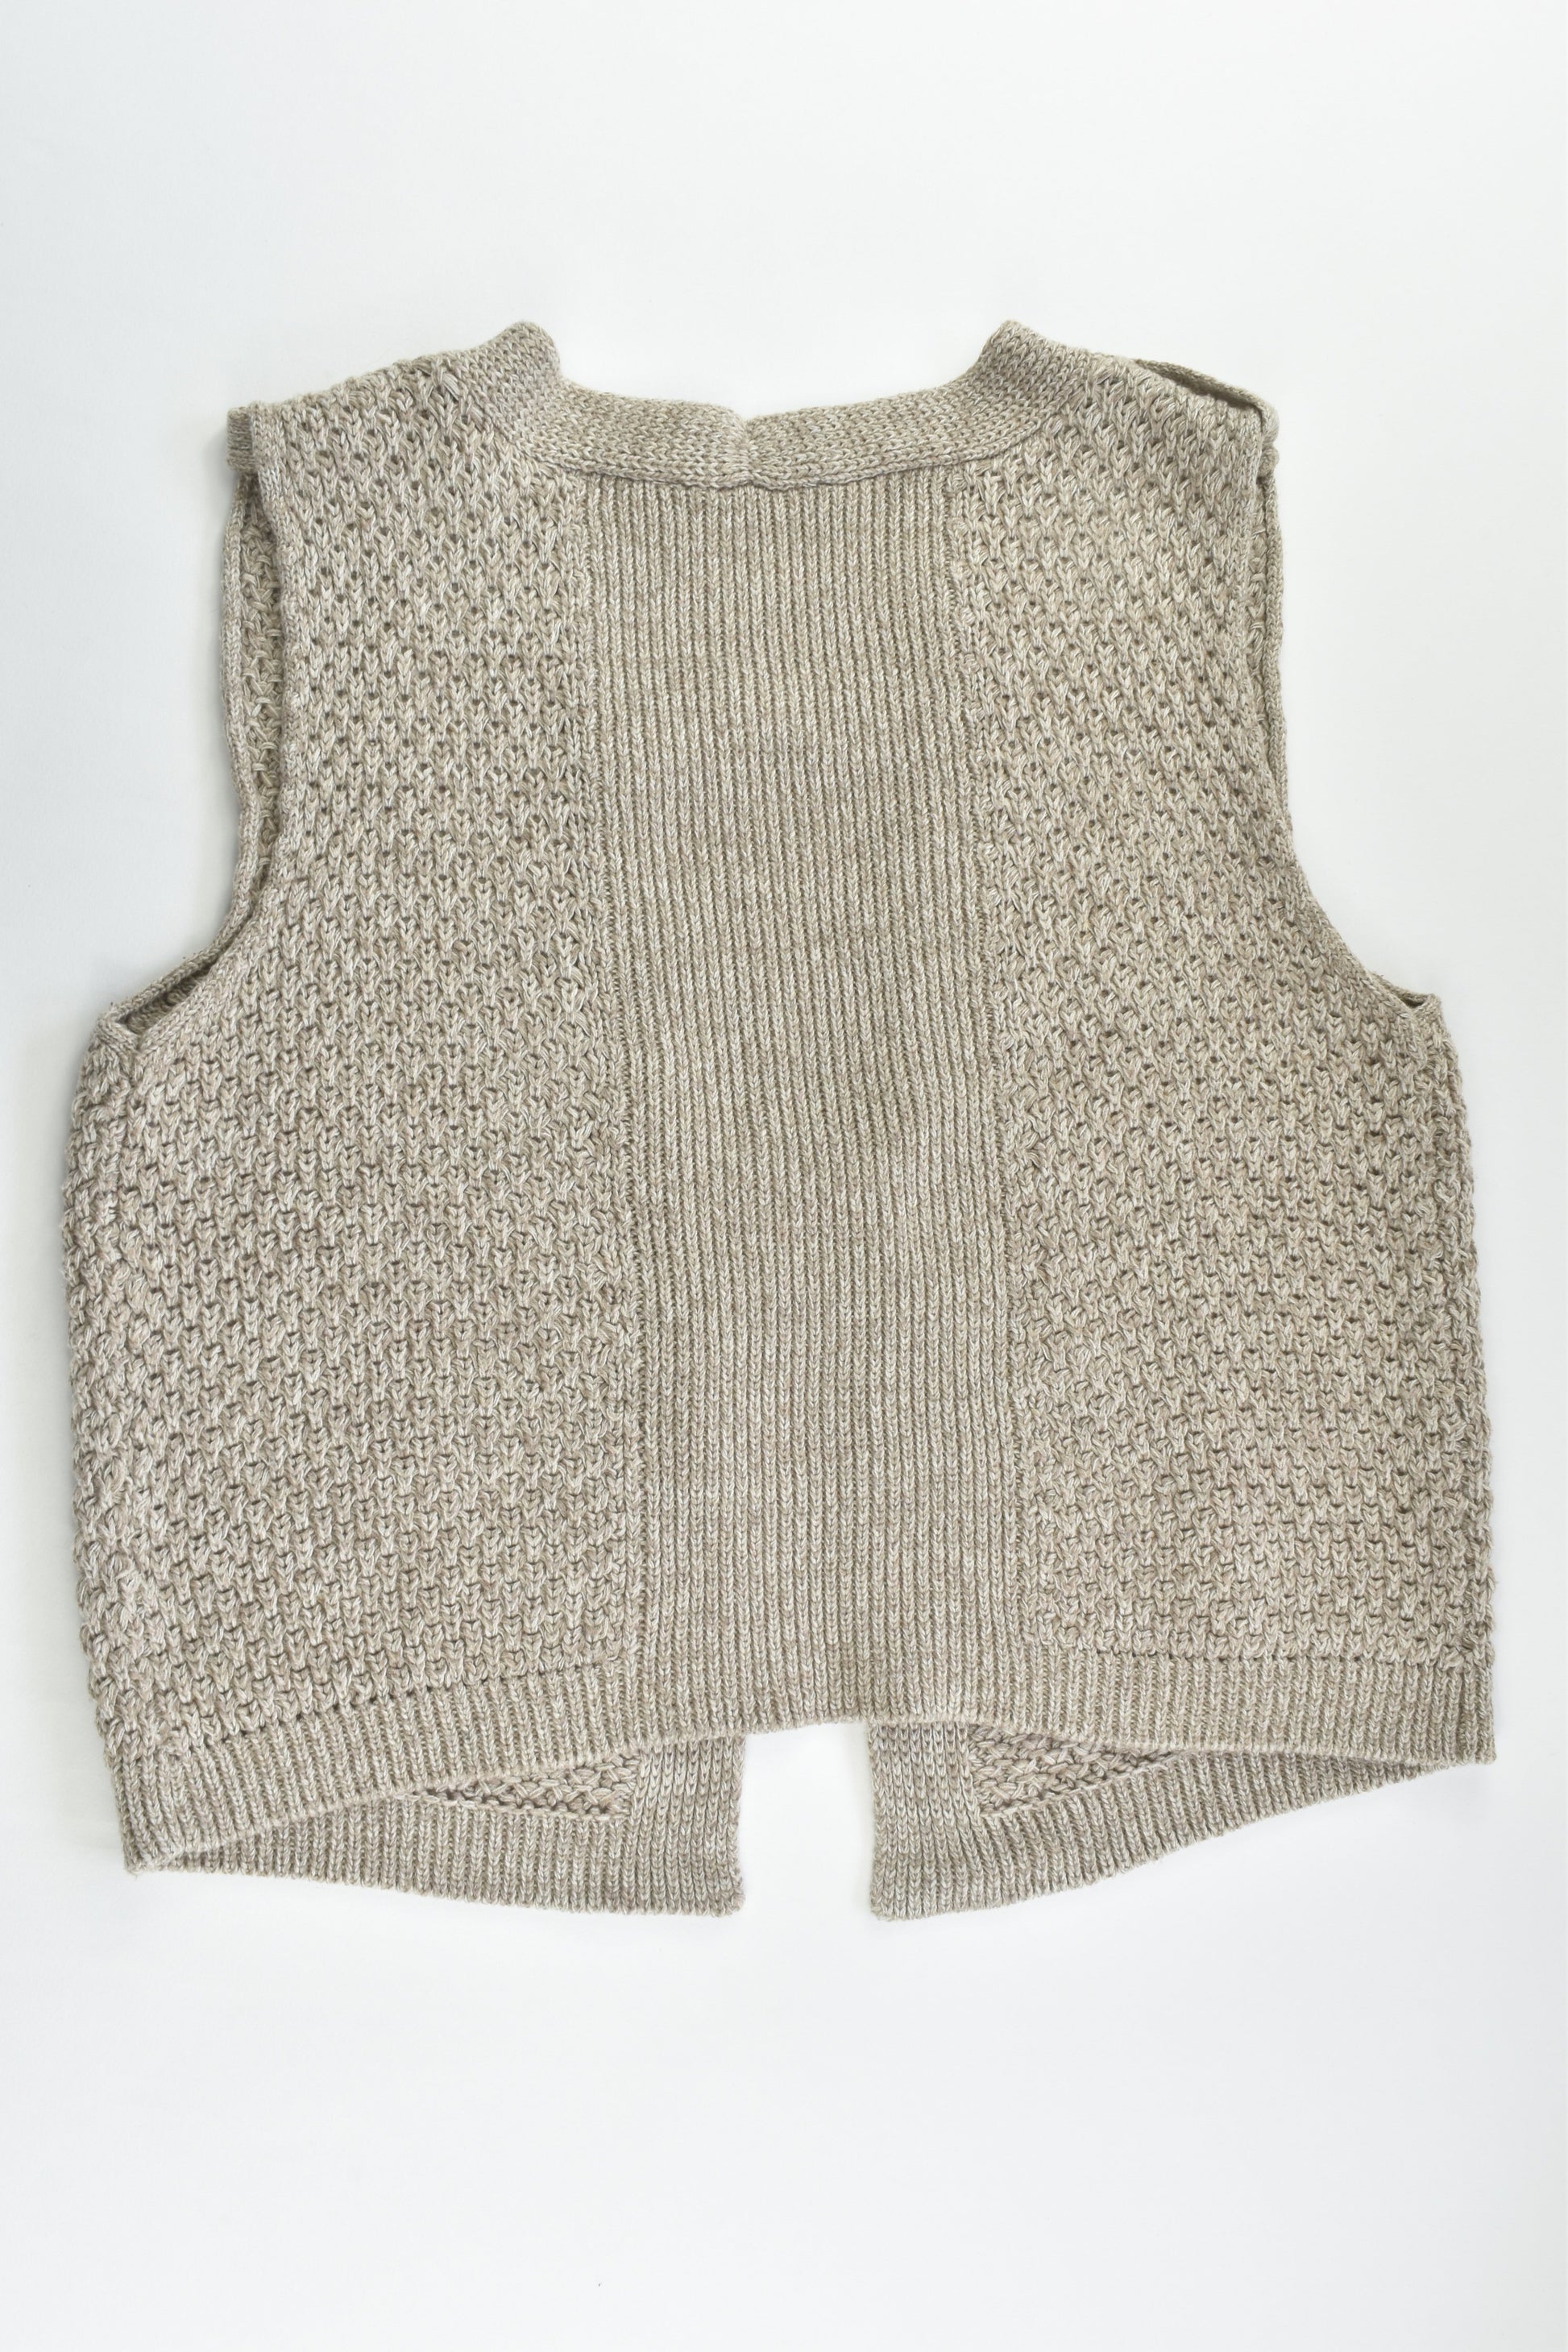 Brand Unknown Size approx 10-12 Knitted Vest